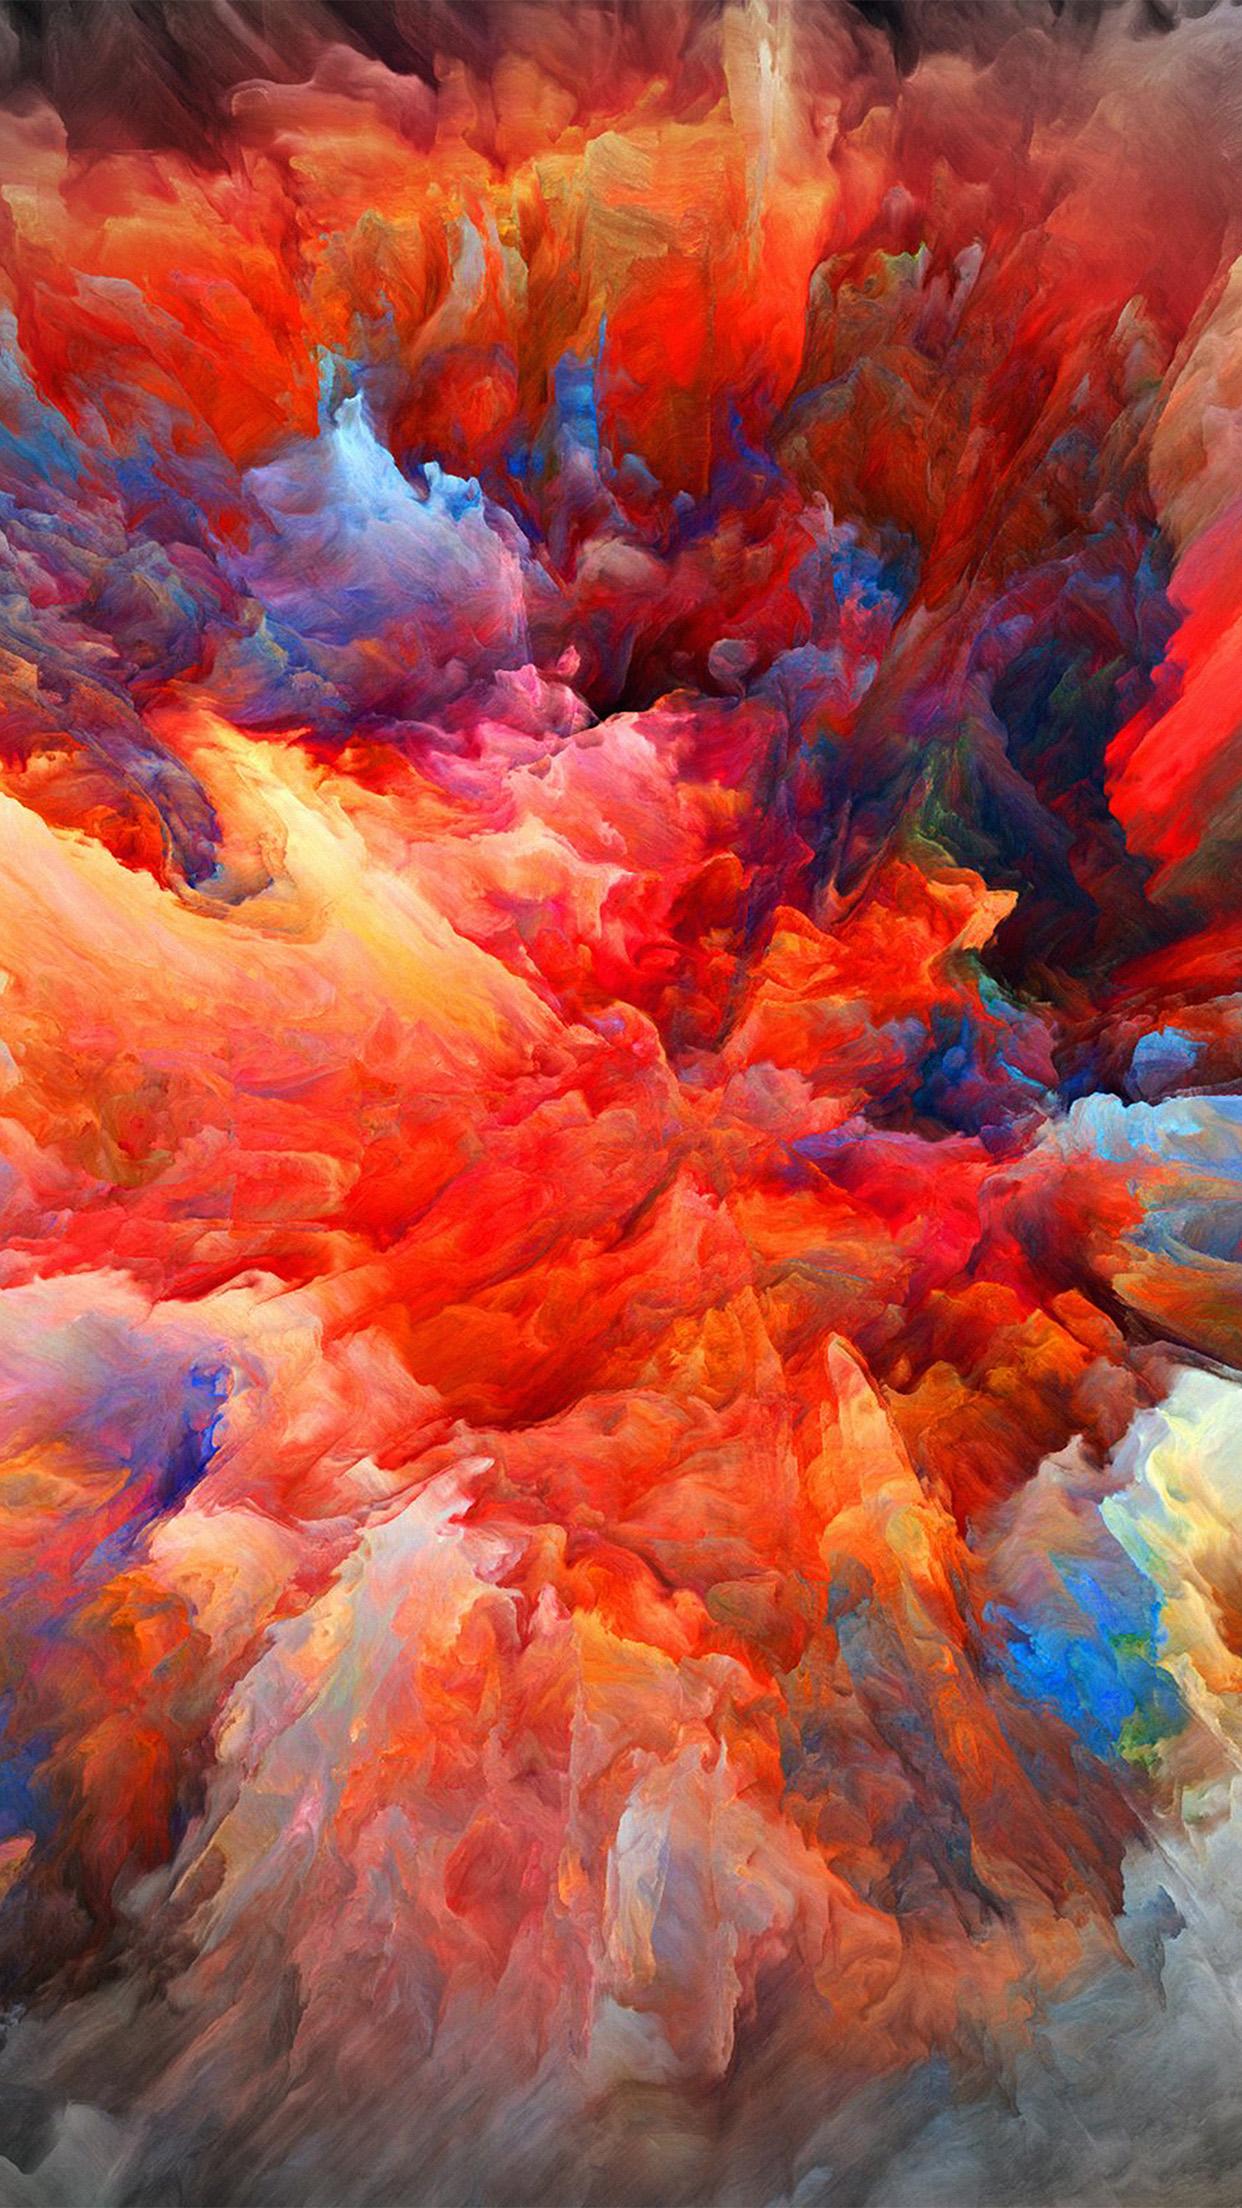 Free photo: Paint Color Explosion, Creative, Painted